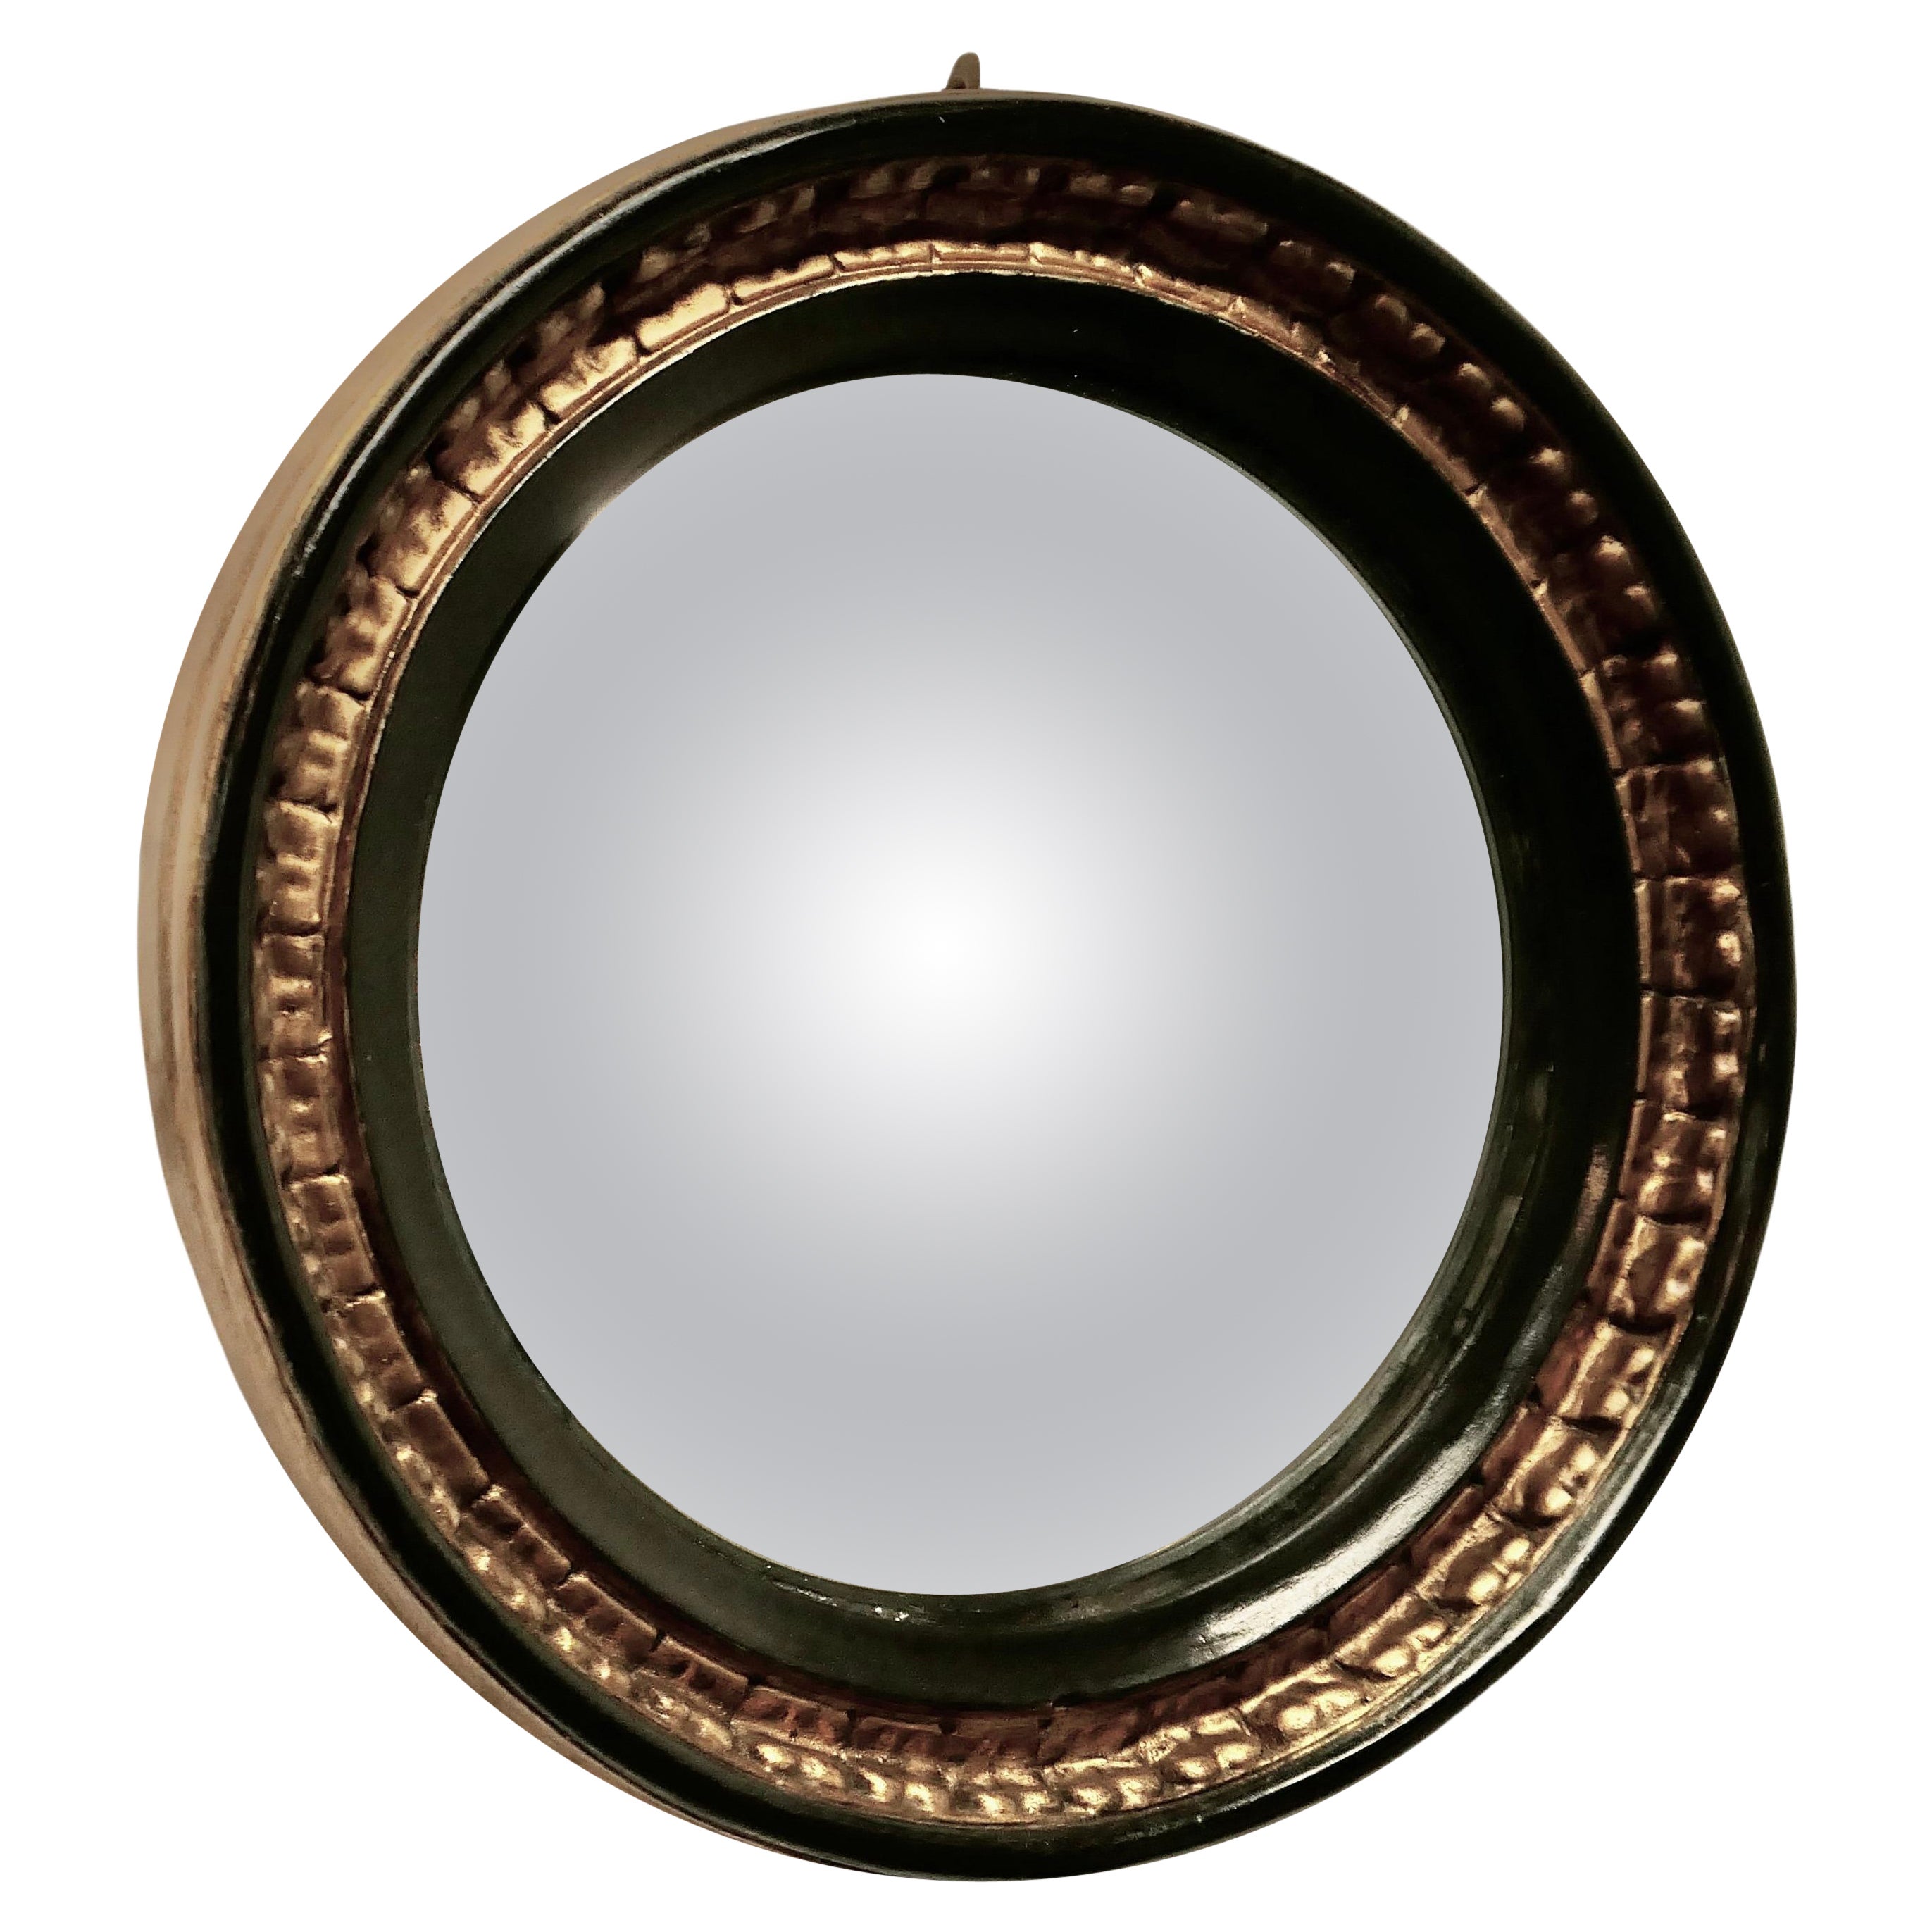 Gilt and Lacquer French Convex Wall Mirror